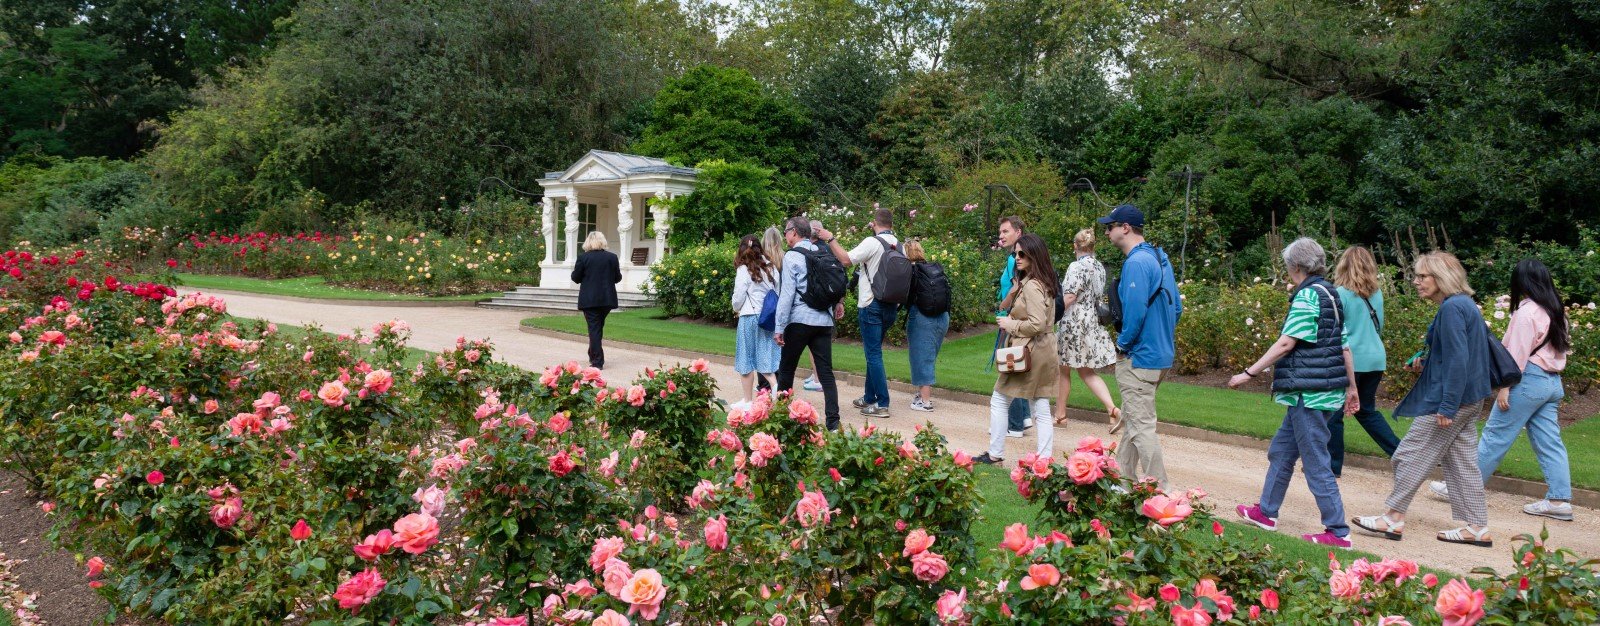 Visitors on a Garden Highlights Tour